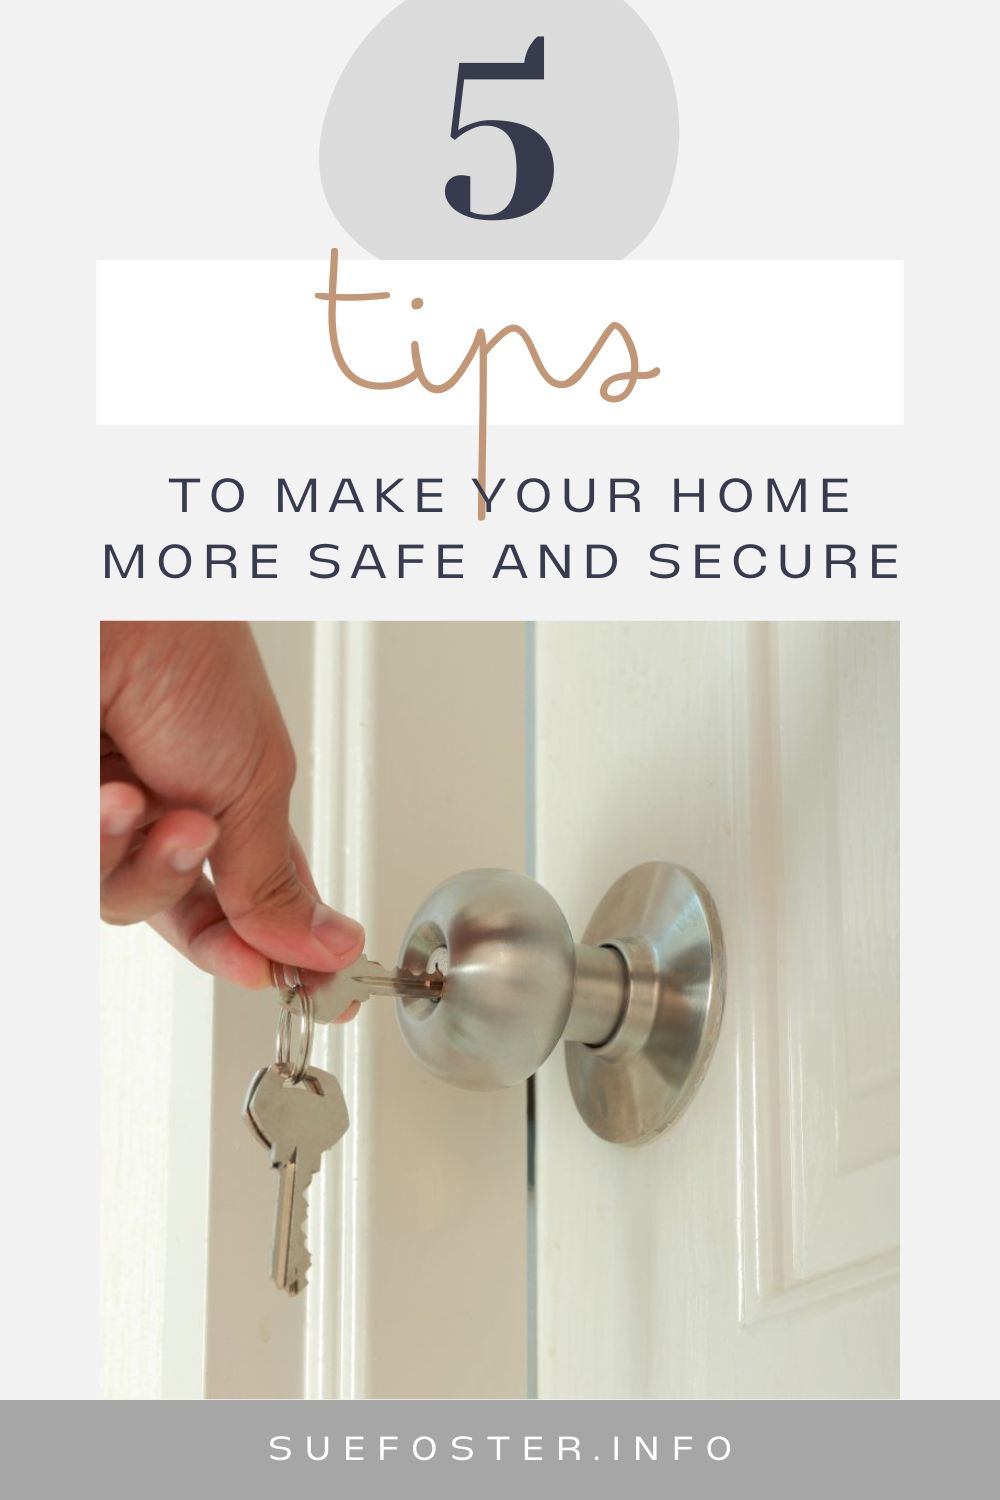 Your home should always be a safe and secure place. Here are five tips to help you ensure your home security.